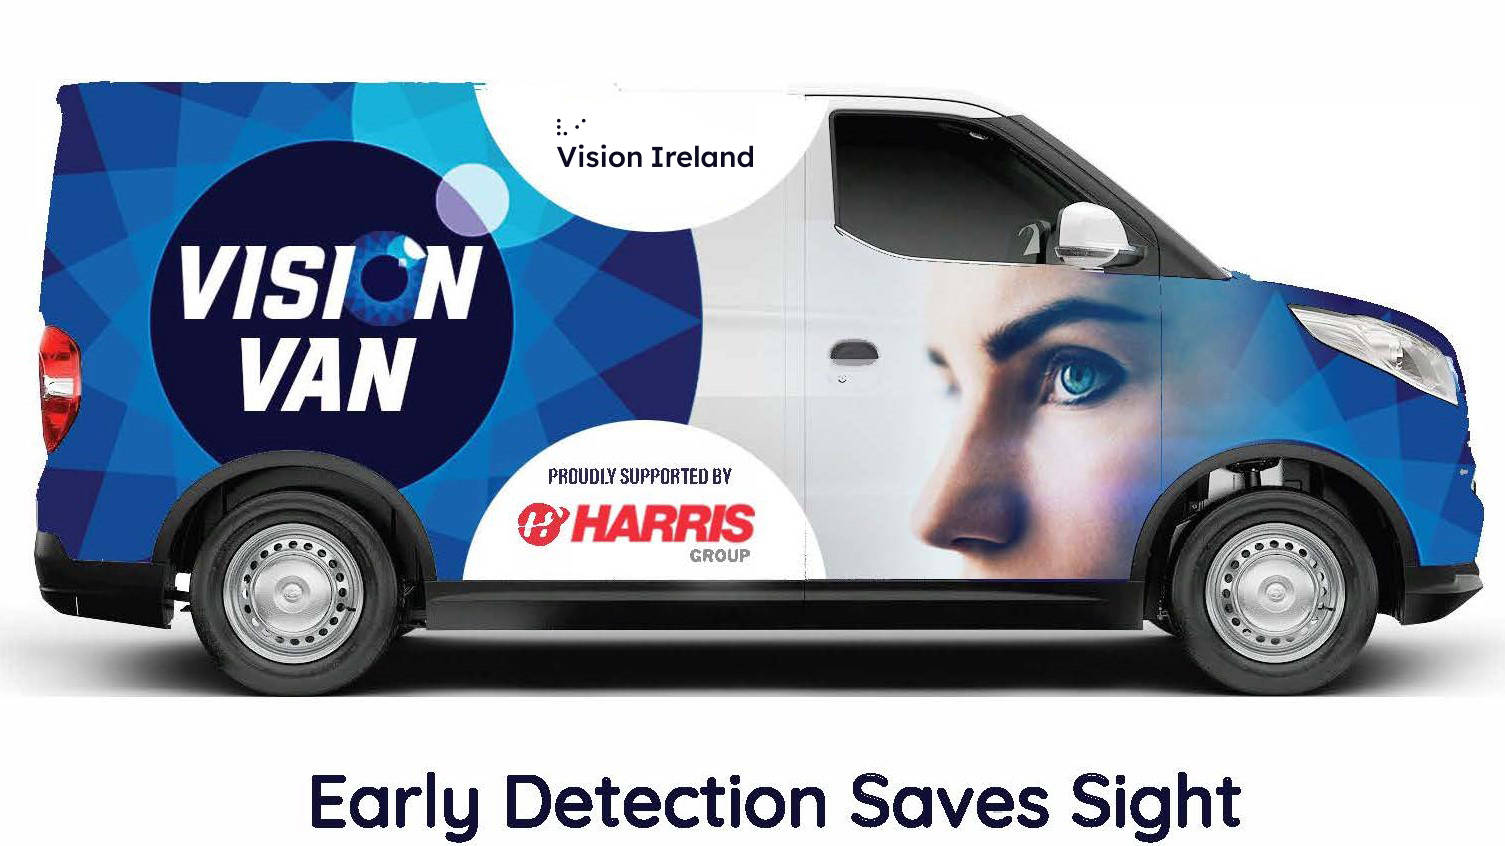 image of a vision van with Vision Ireland and harris transport logo with a woman's face on the van